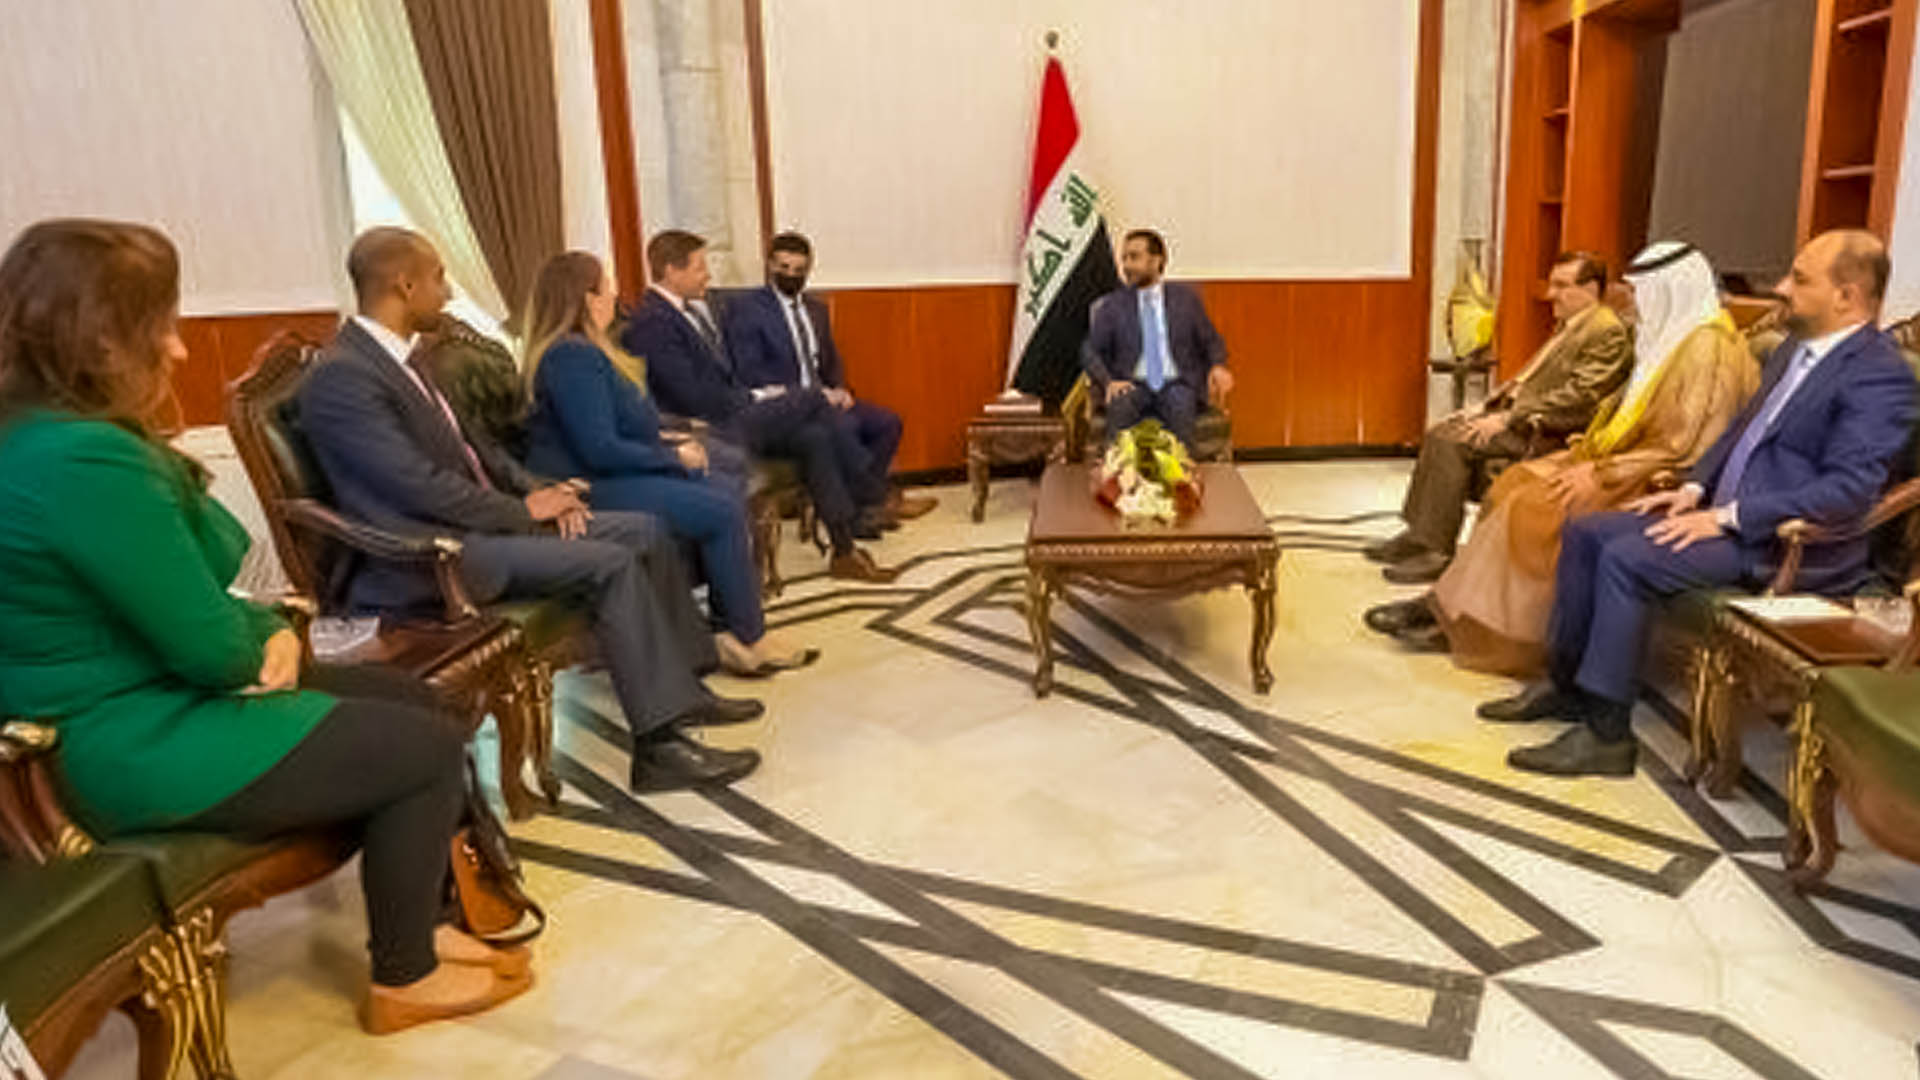 Discussions between Iraq and Estonia about bilateral relations